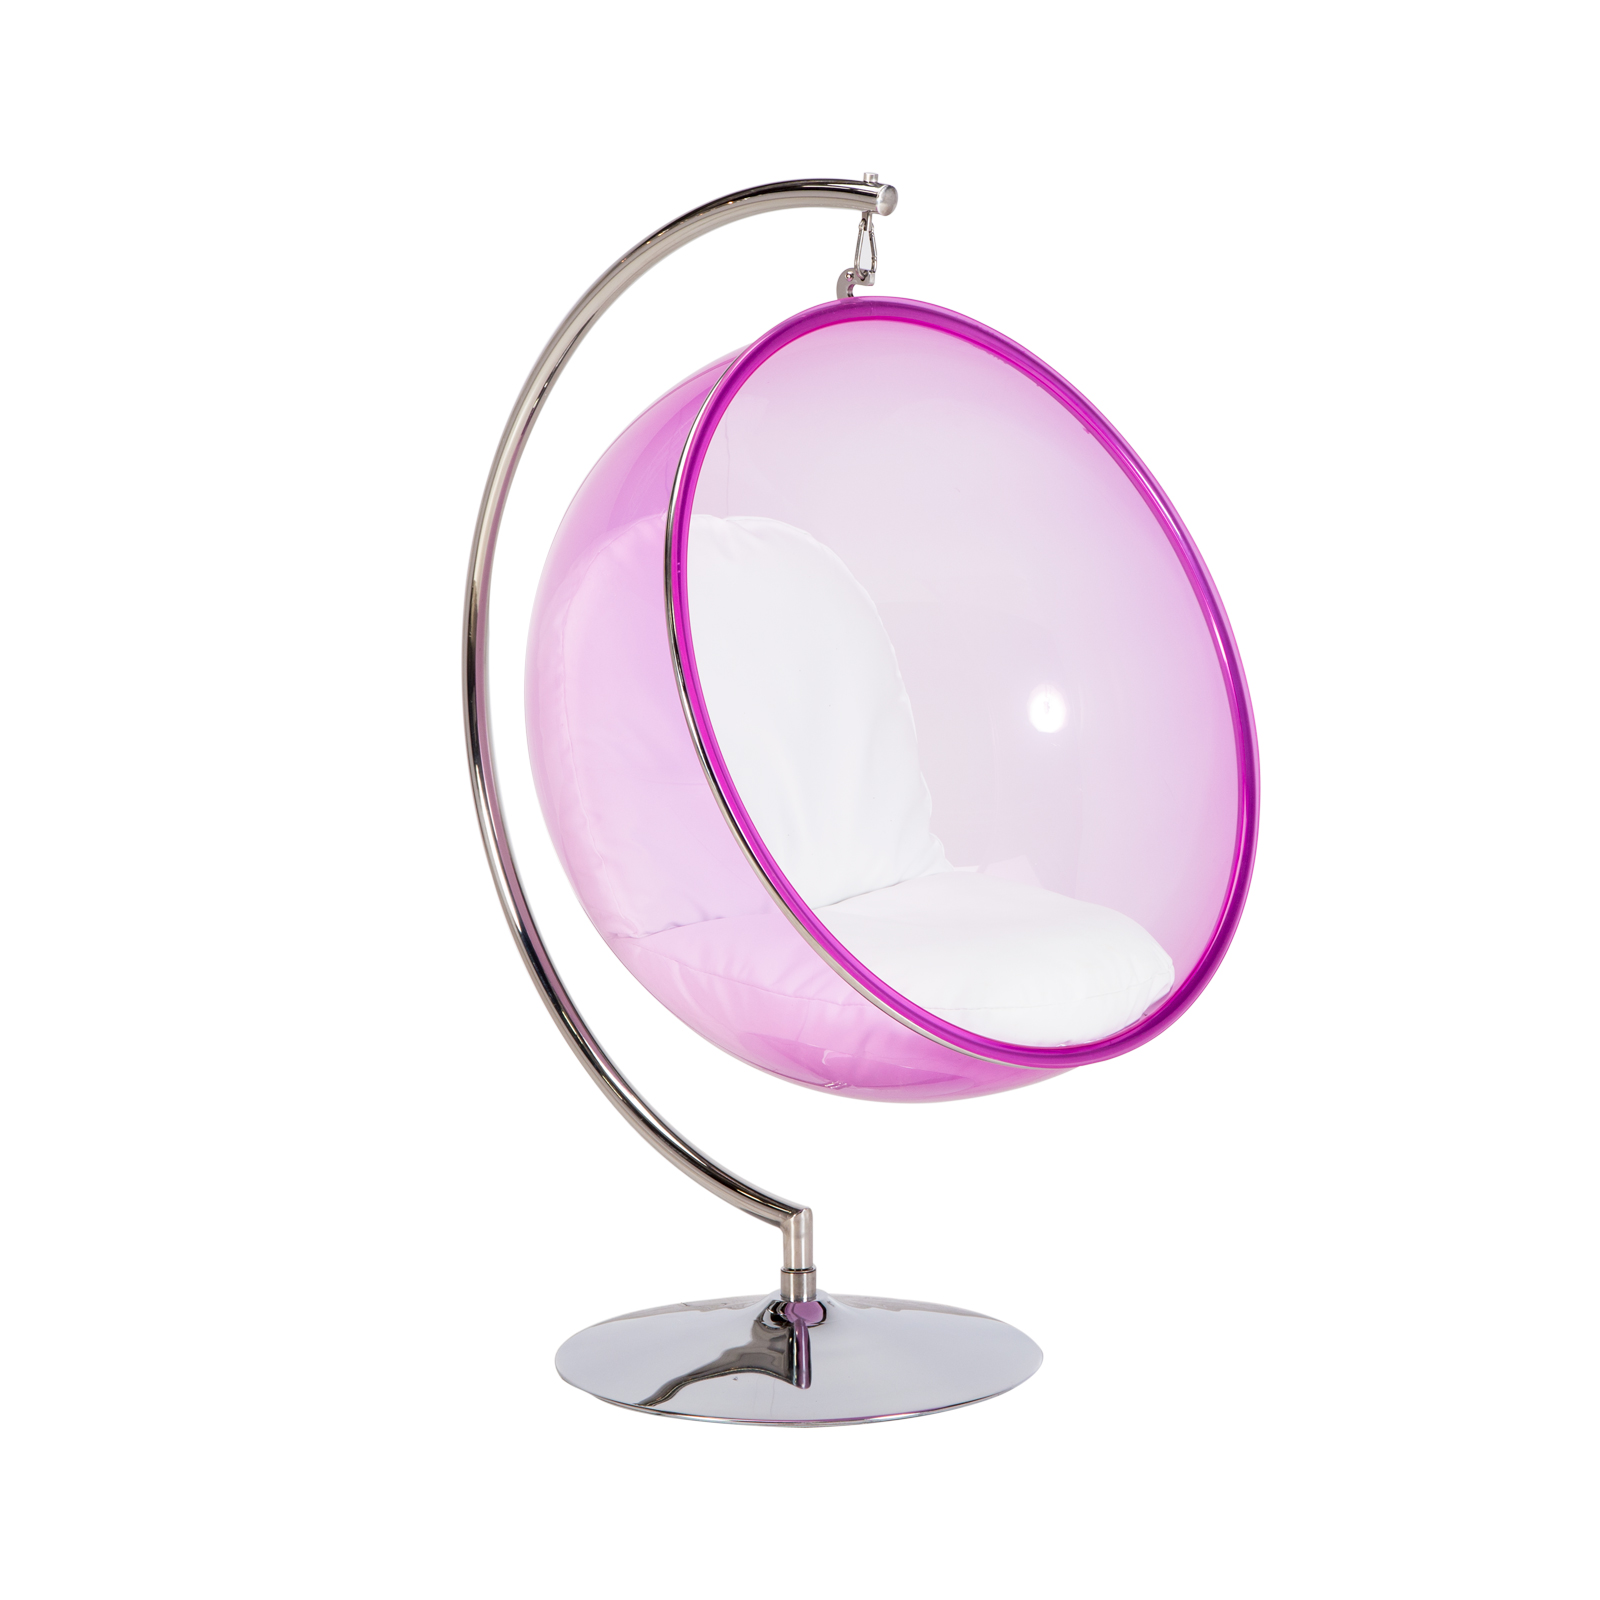 Hanging Ball Chair | Event Trade Show Furniture Rental | FormDecor